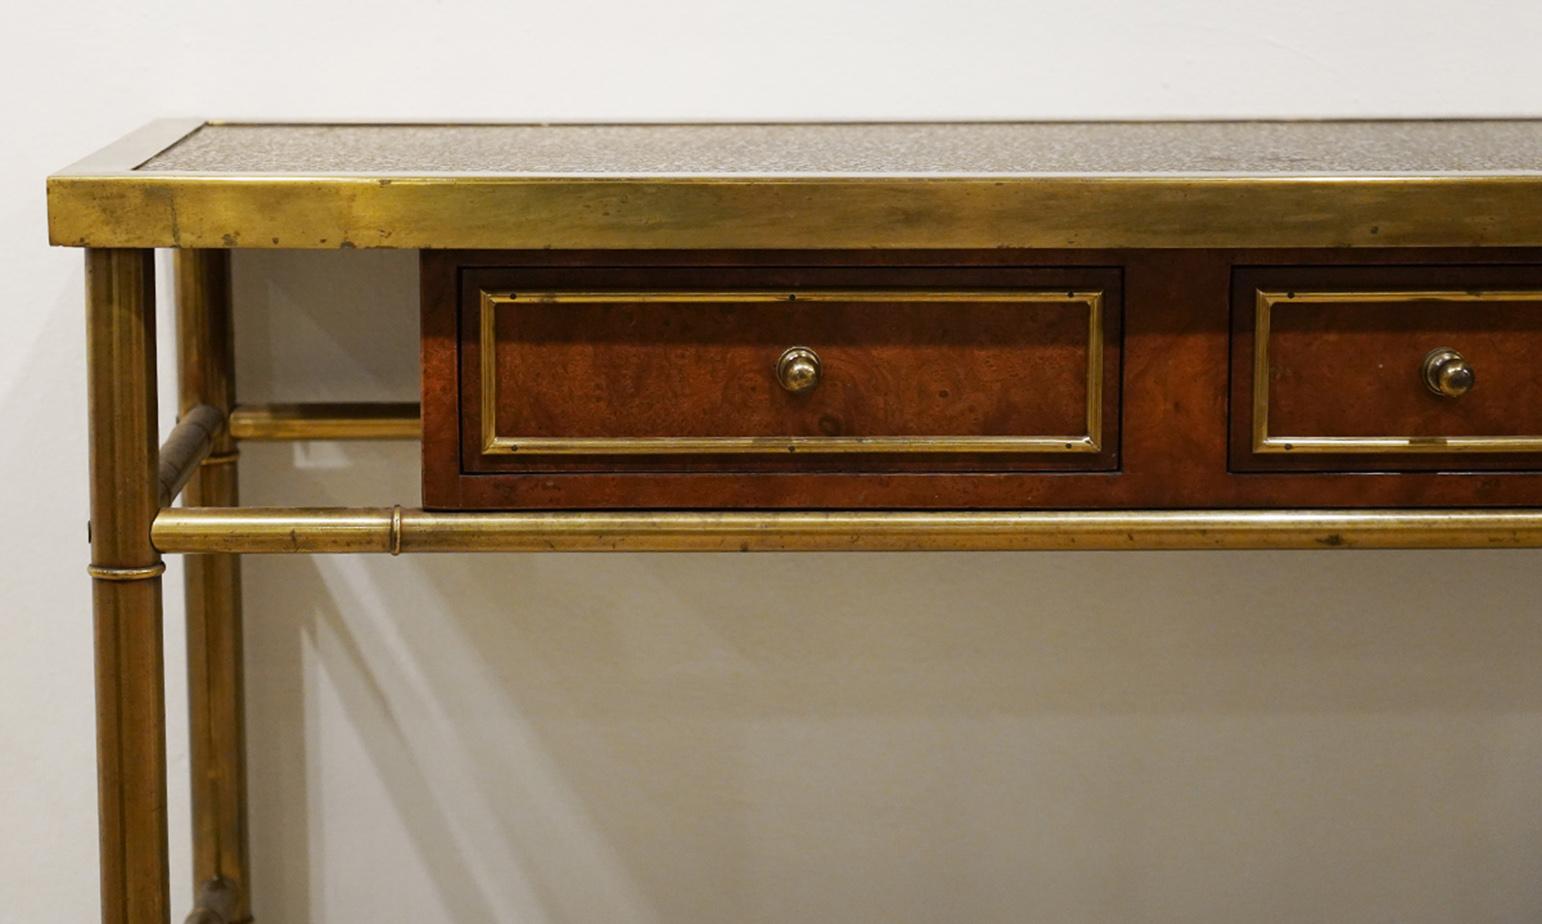 This 20th century brass and burled walnut console table by Mastercraft features an etched and patinated brass panel top above brass piping framed short burled walnut drawers flanking one long drawer all supported within a stylized ringed bamboo